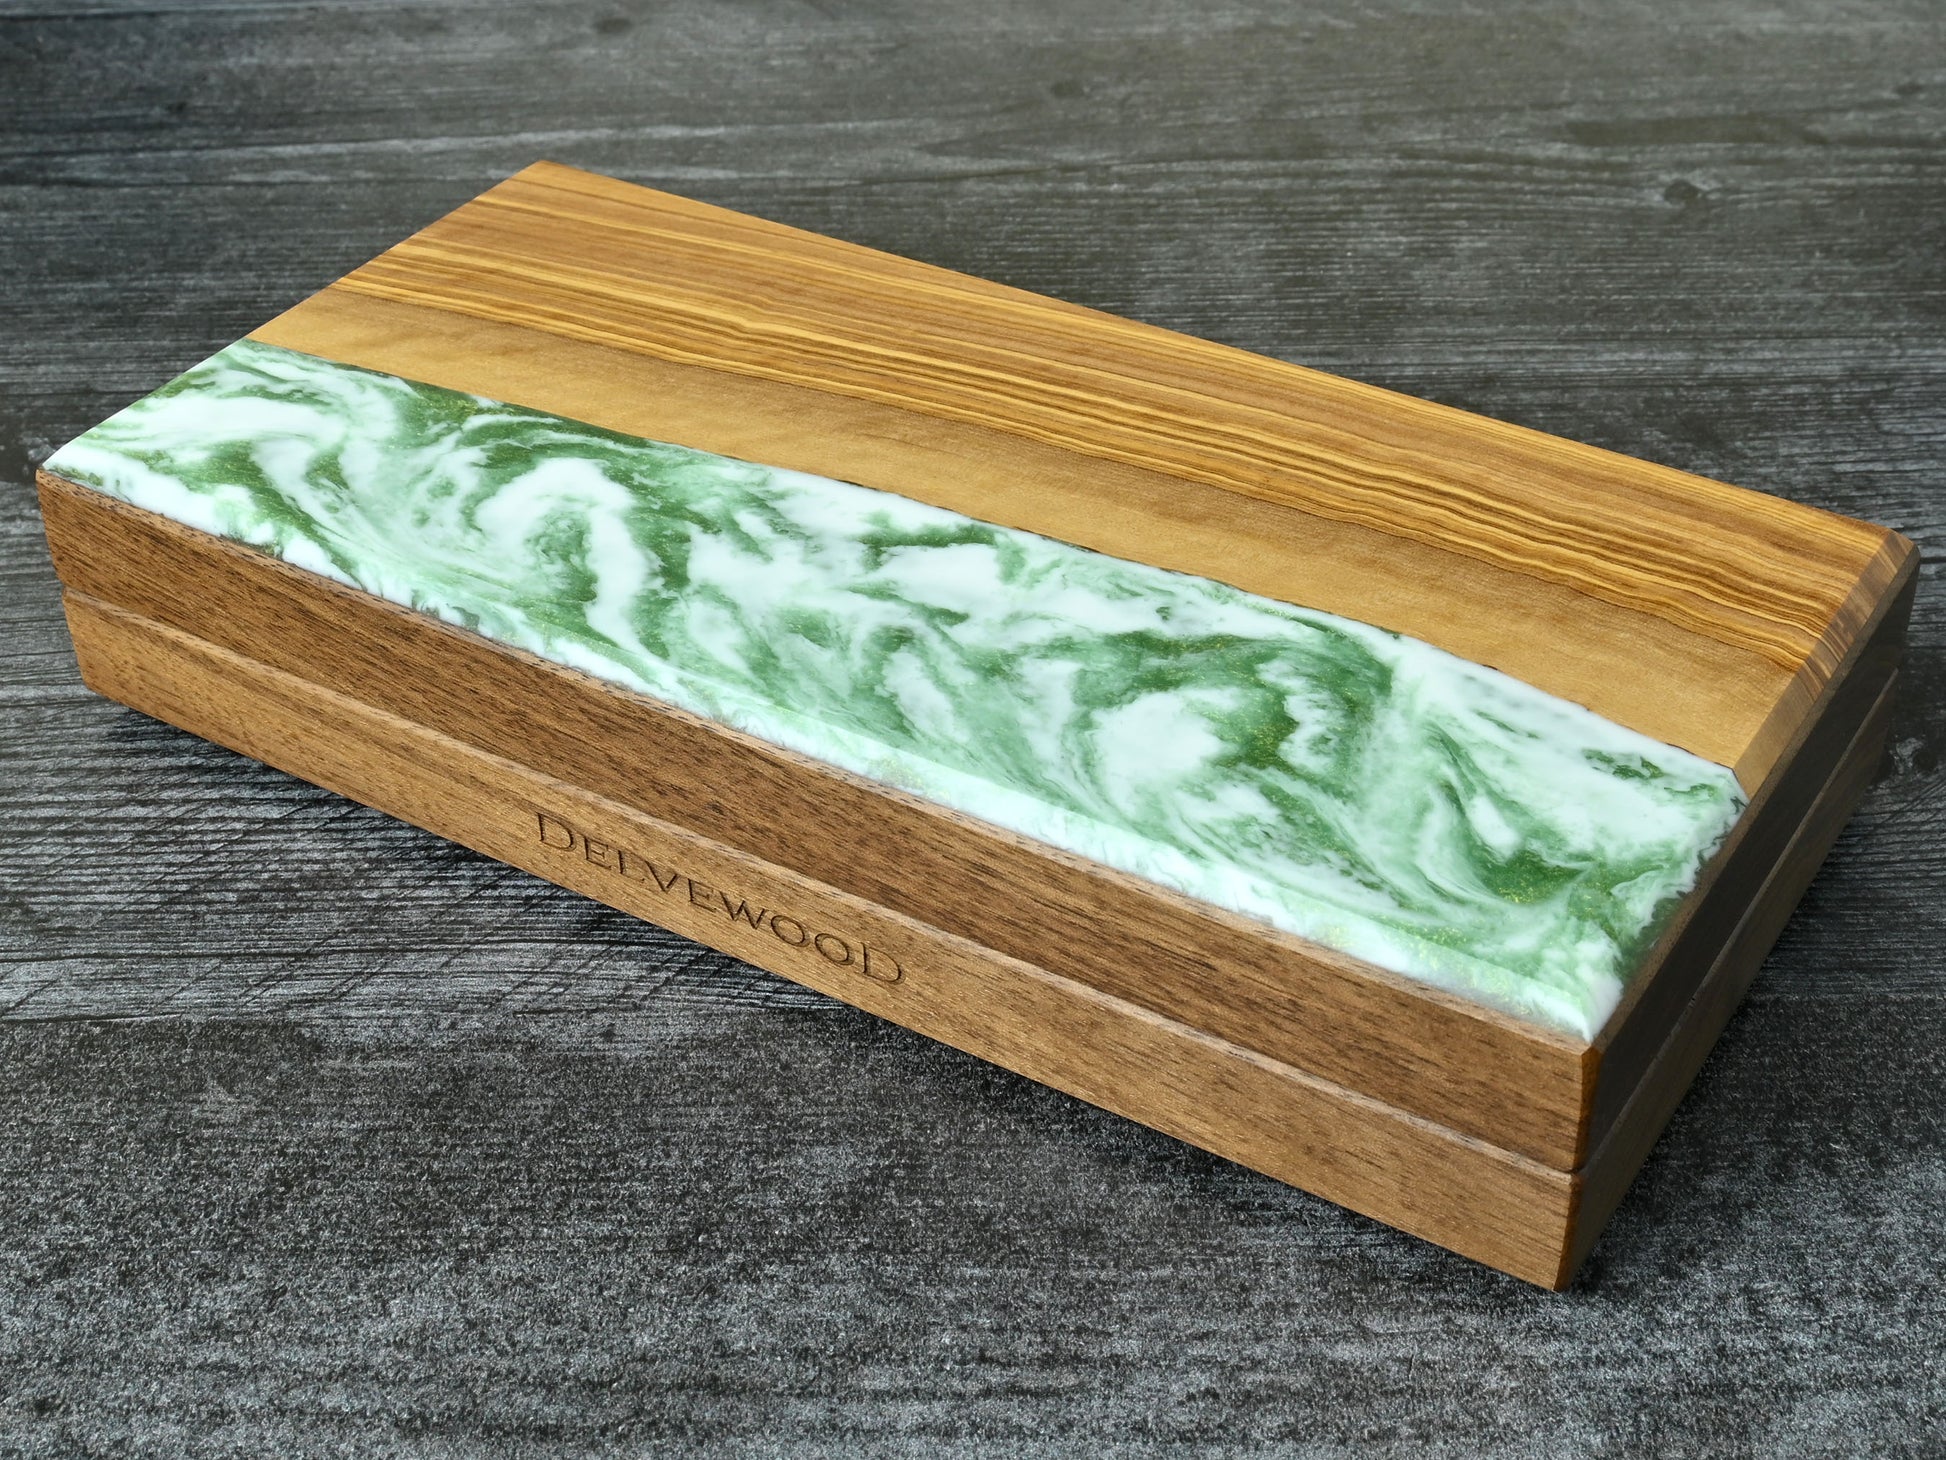 Misty forest olivewood and walnut Delver's kit dice box & tray for D&D ttrpg